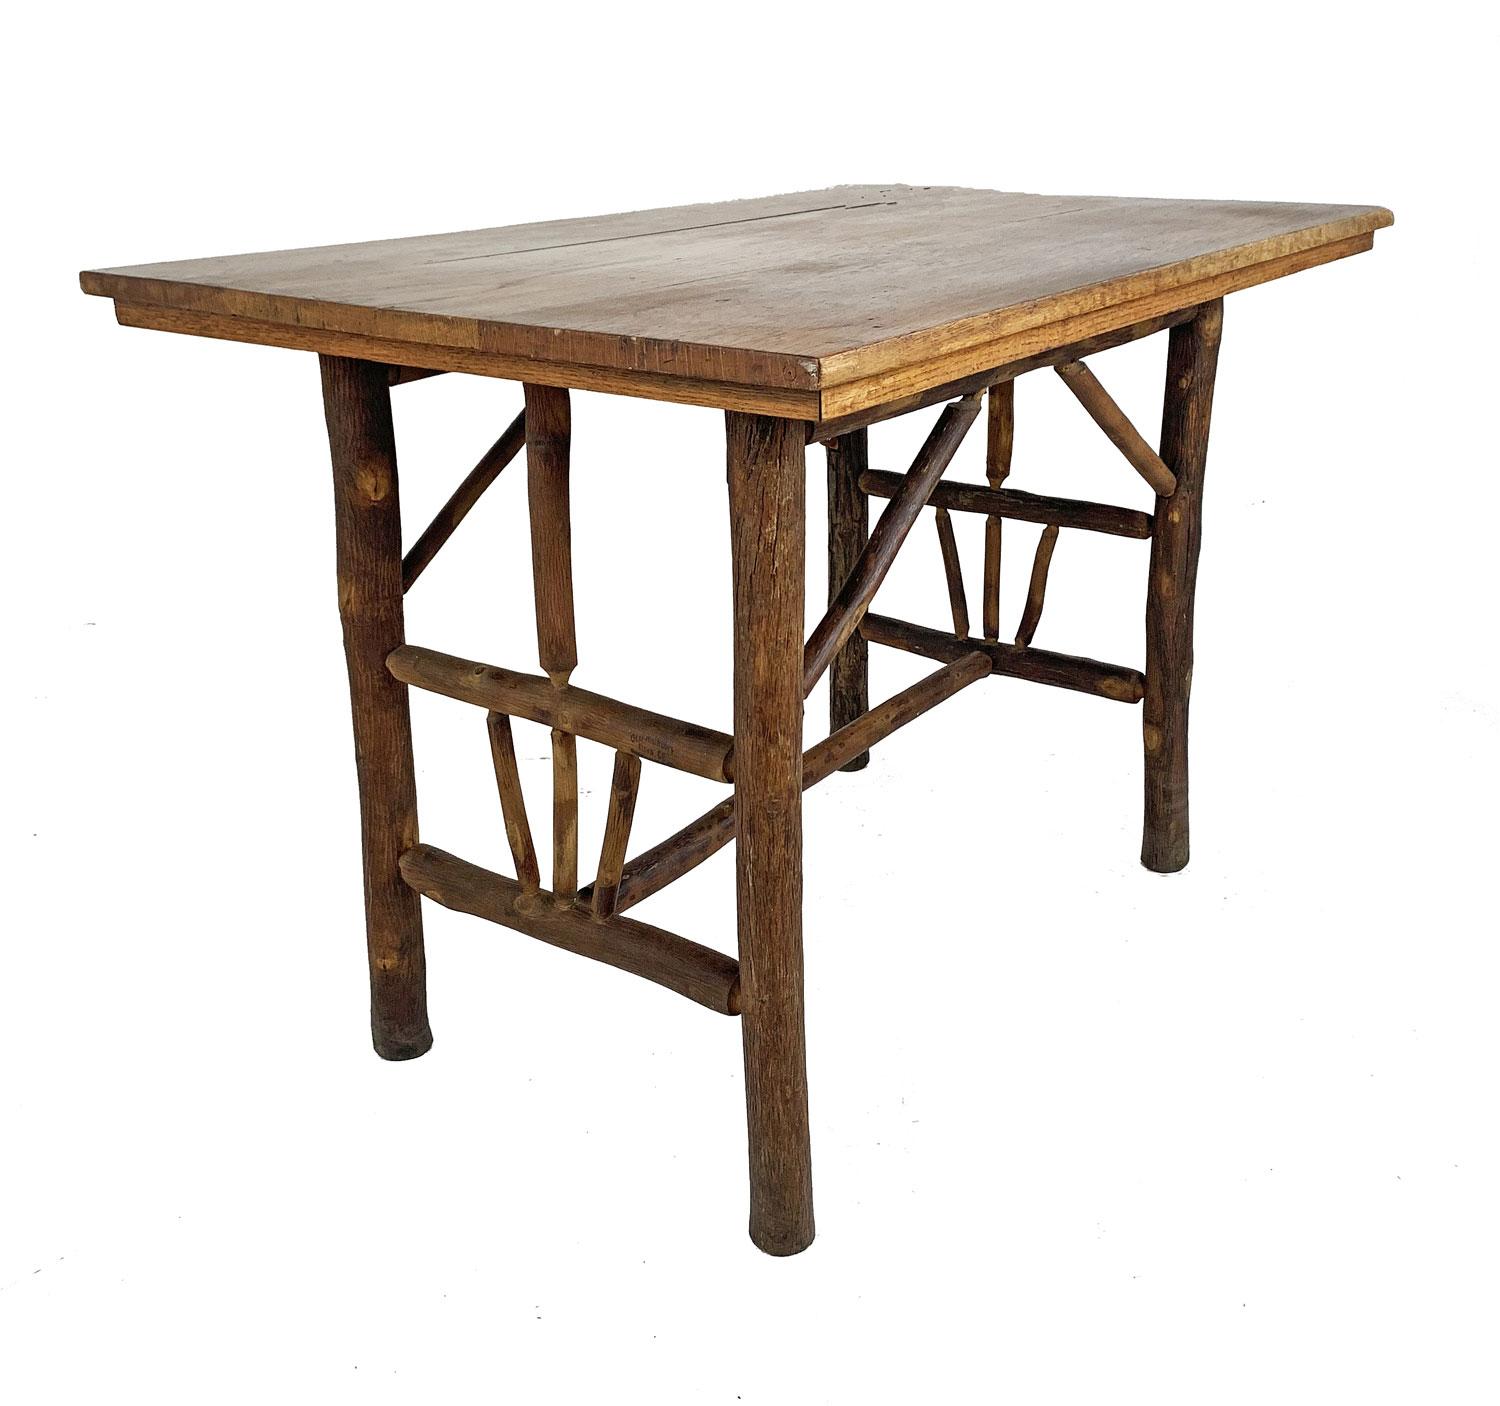 The hickory base of this handsome table has lower side panels with hickory pole fans, one low and one high cross stretcher, and four diagonal top braces. The three-board oak top has integral expansion grooves. It appears as “No. 219 Table” in the